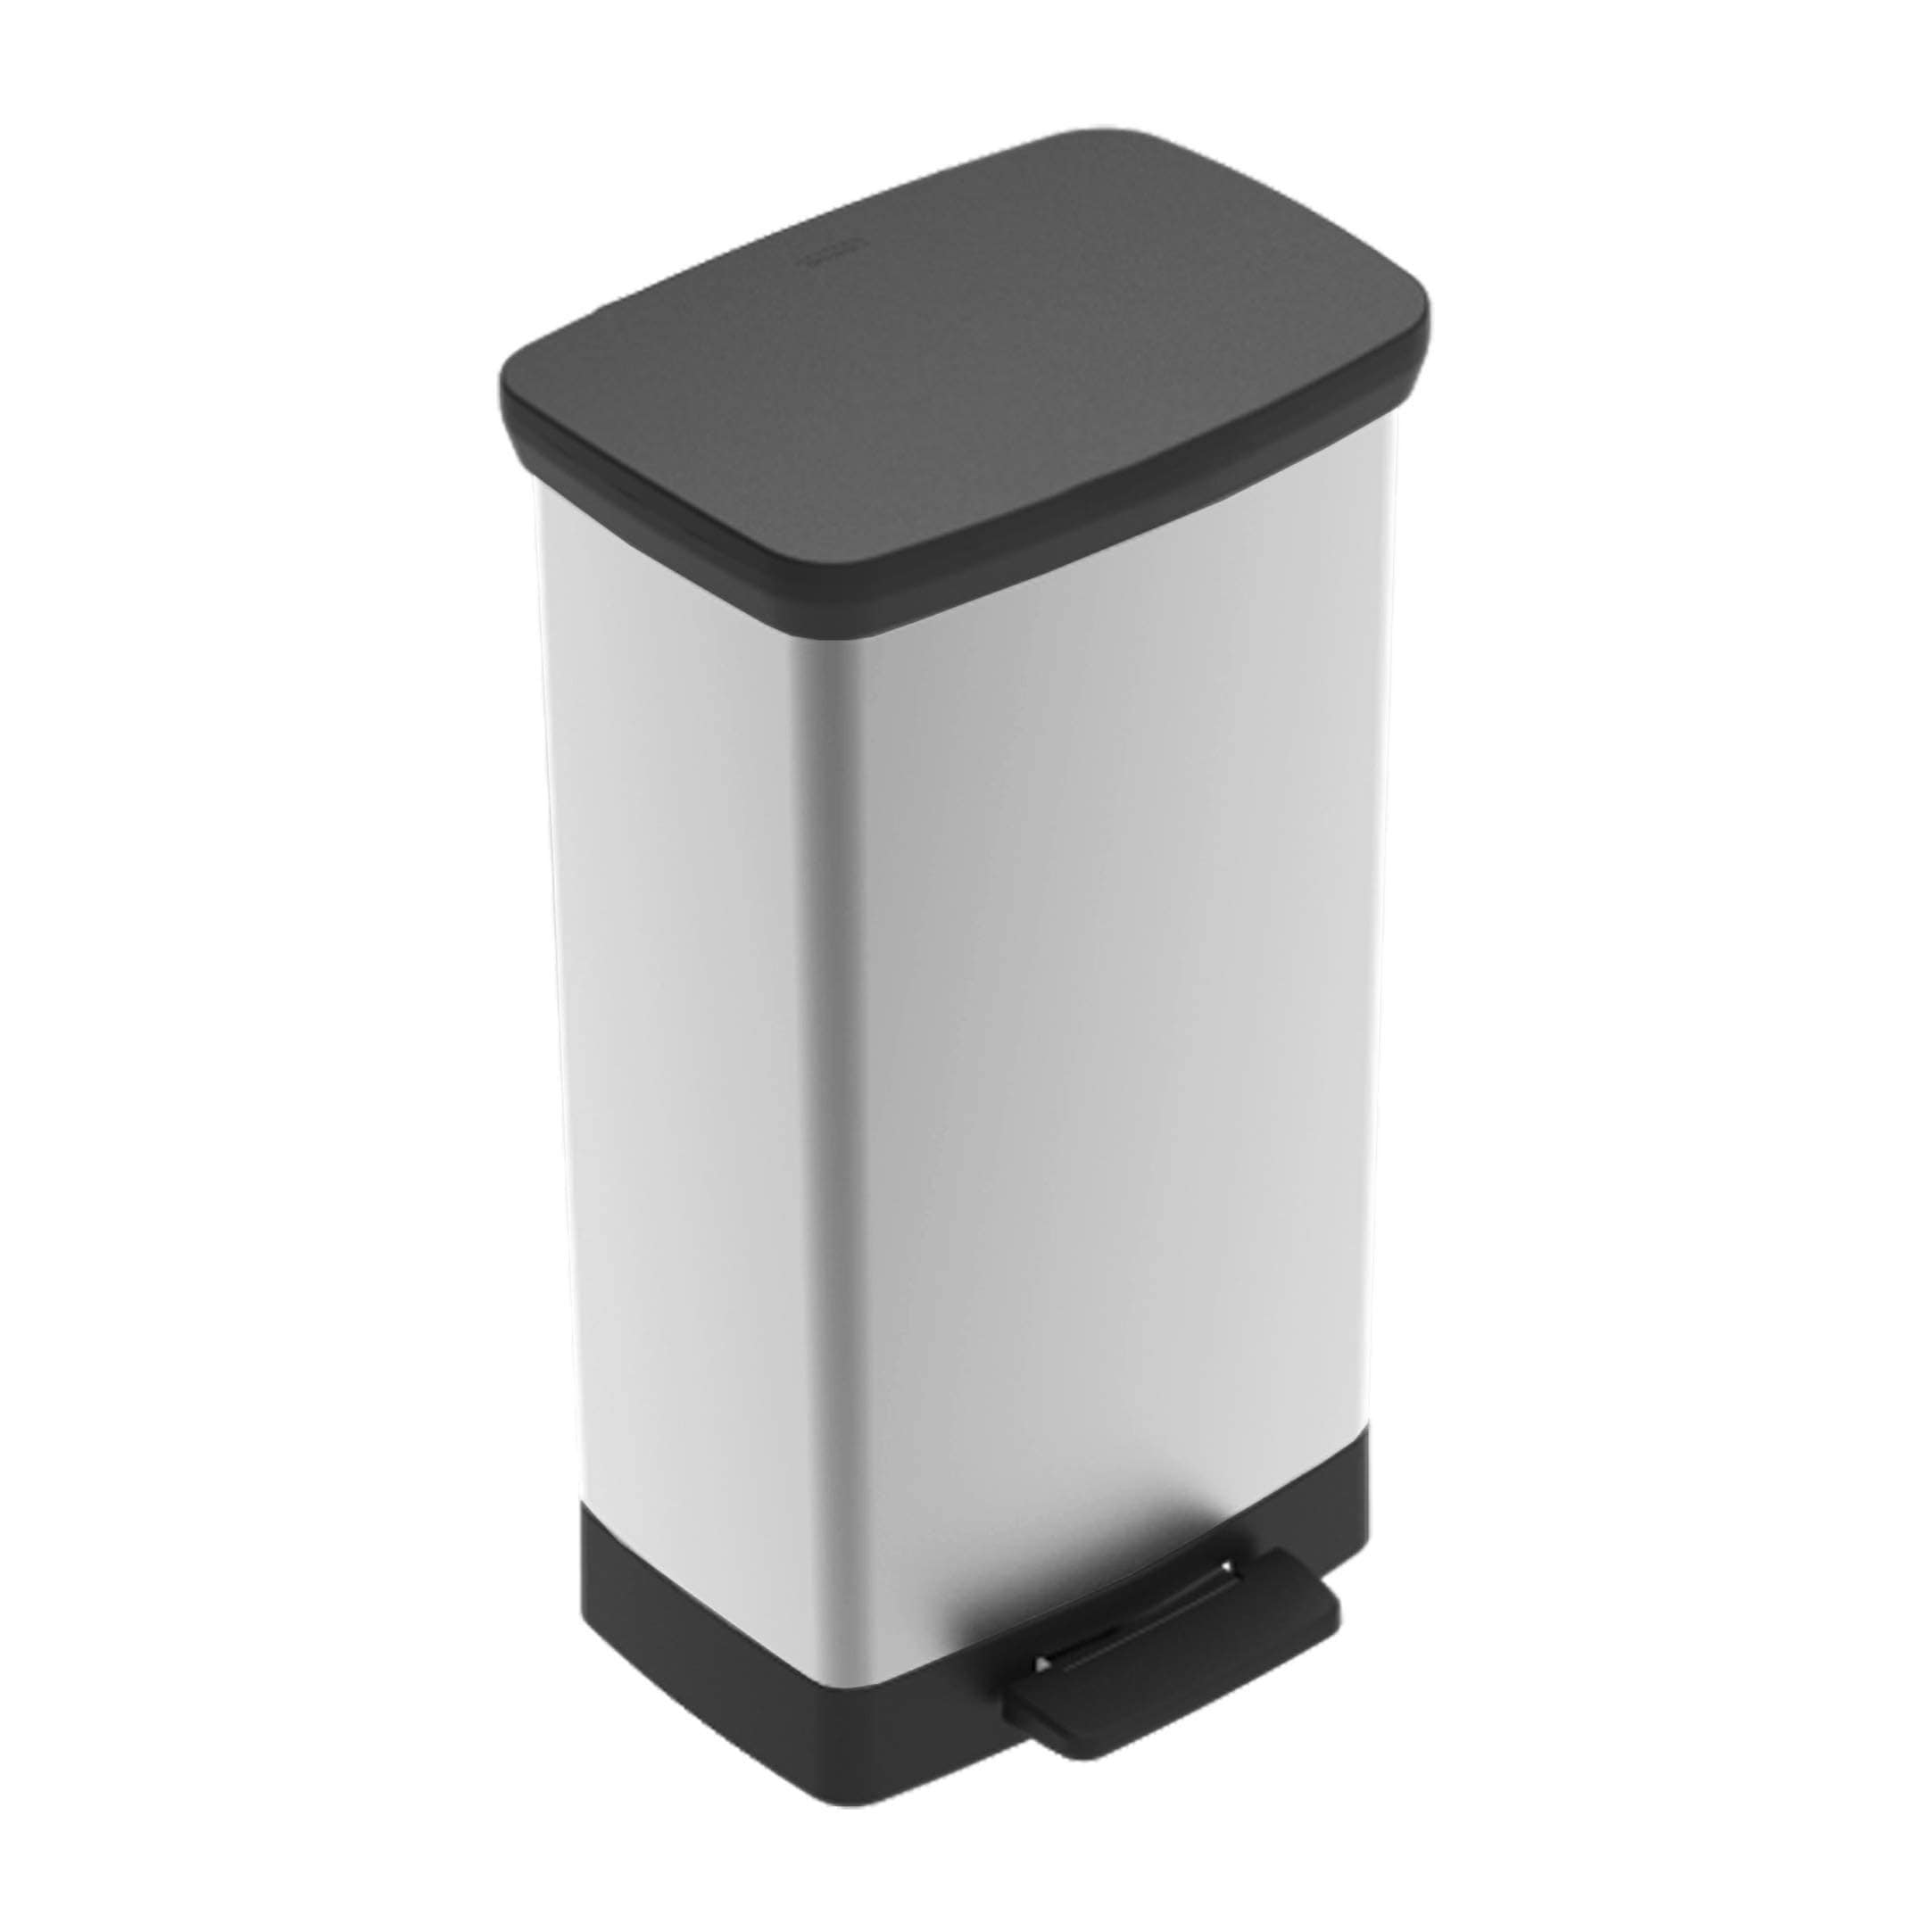 https://ak1.ostkcdn.com/images/products/is/images/direct/3ea25ba89f7fb7353fcdc6cb43cafdd0902b0c7e/Resin-Deco-Bin-50-Liter-Perfect-for-Household-Use-Indoor-for-Garbage-Disposal%2C-Black-Silver.jpg